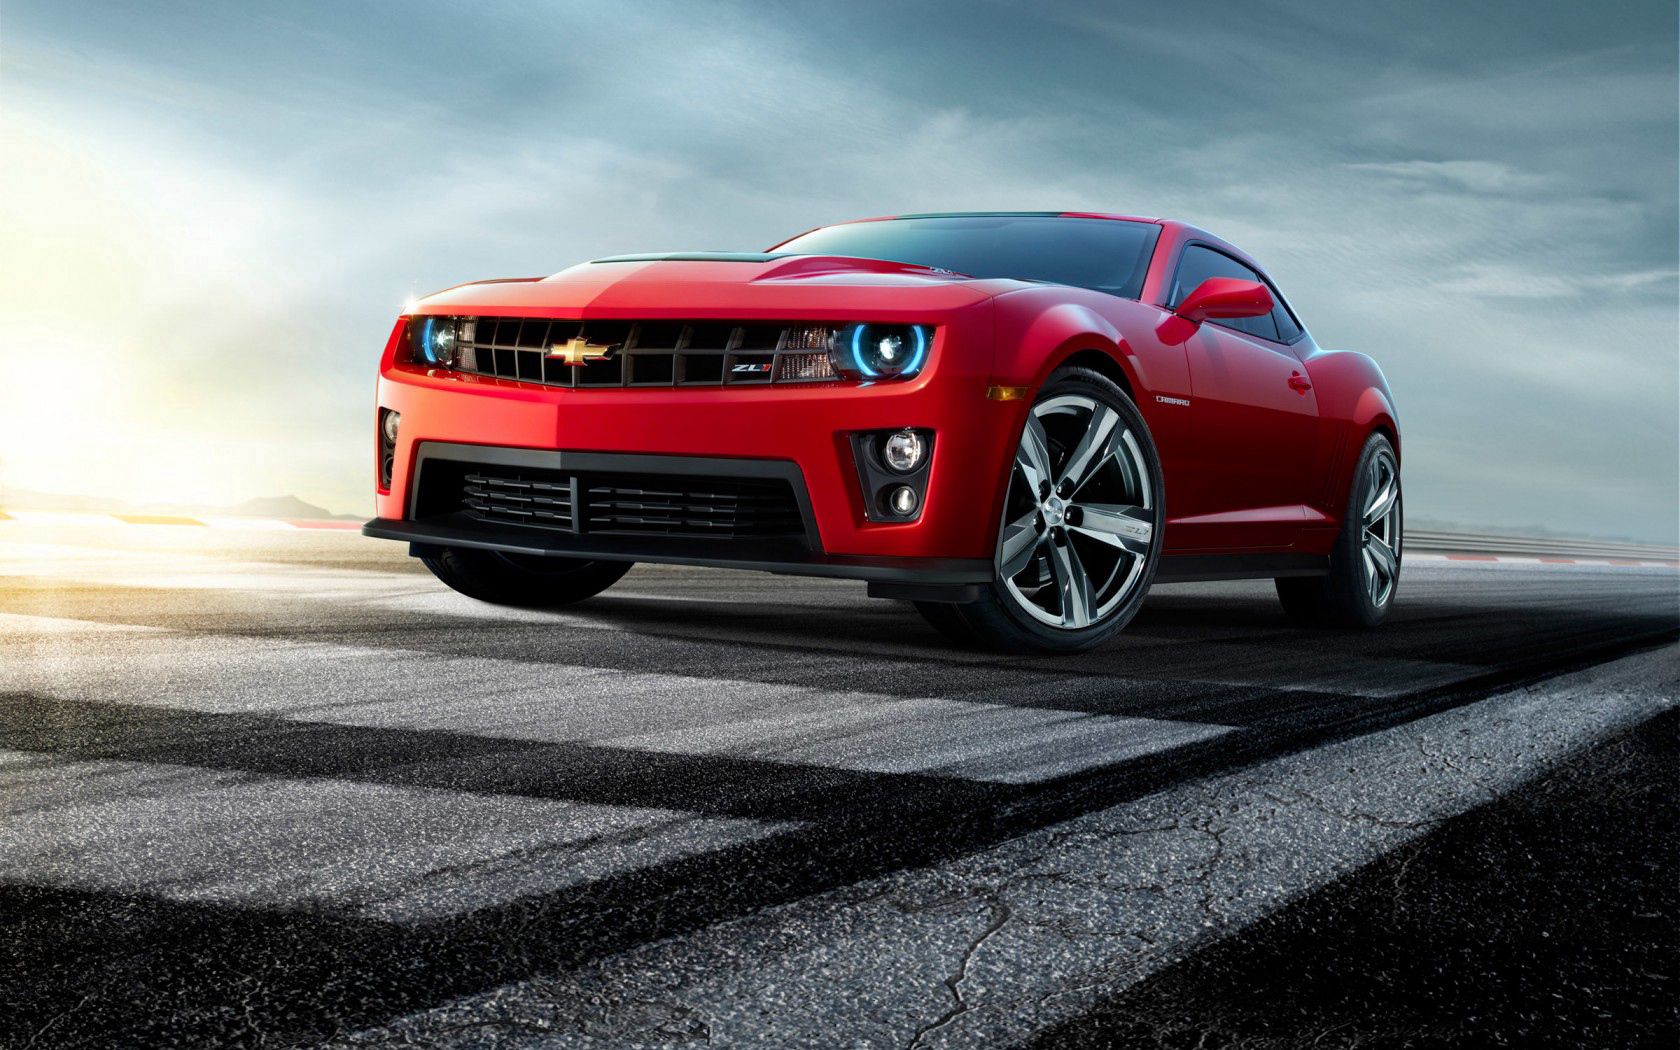 cars, chevrolet, red, front view, camaro mobile wallpaper